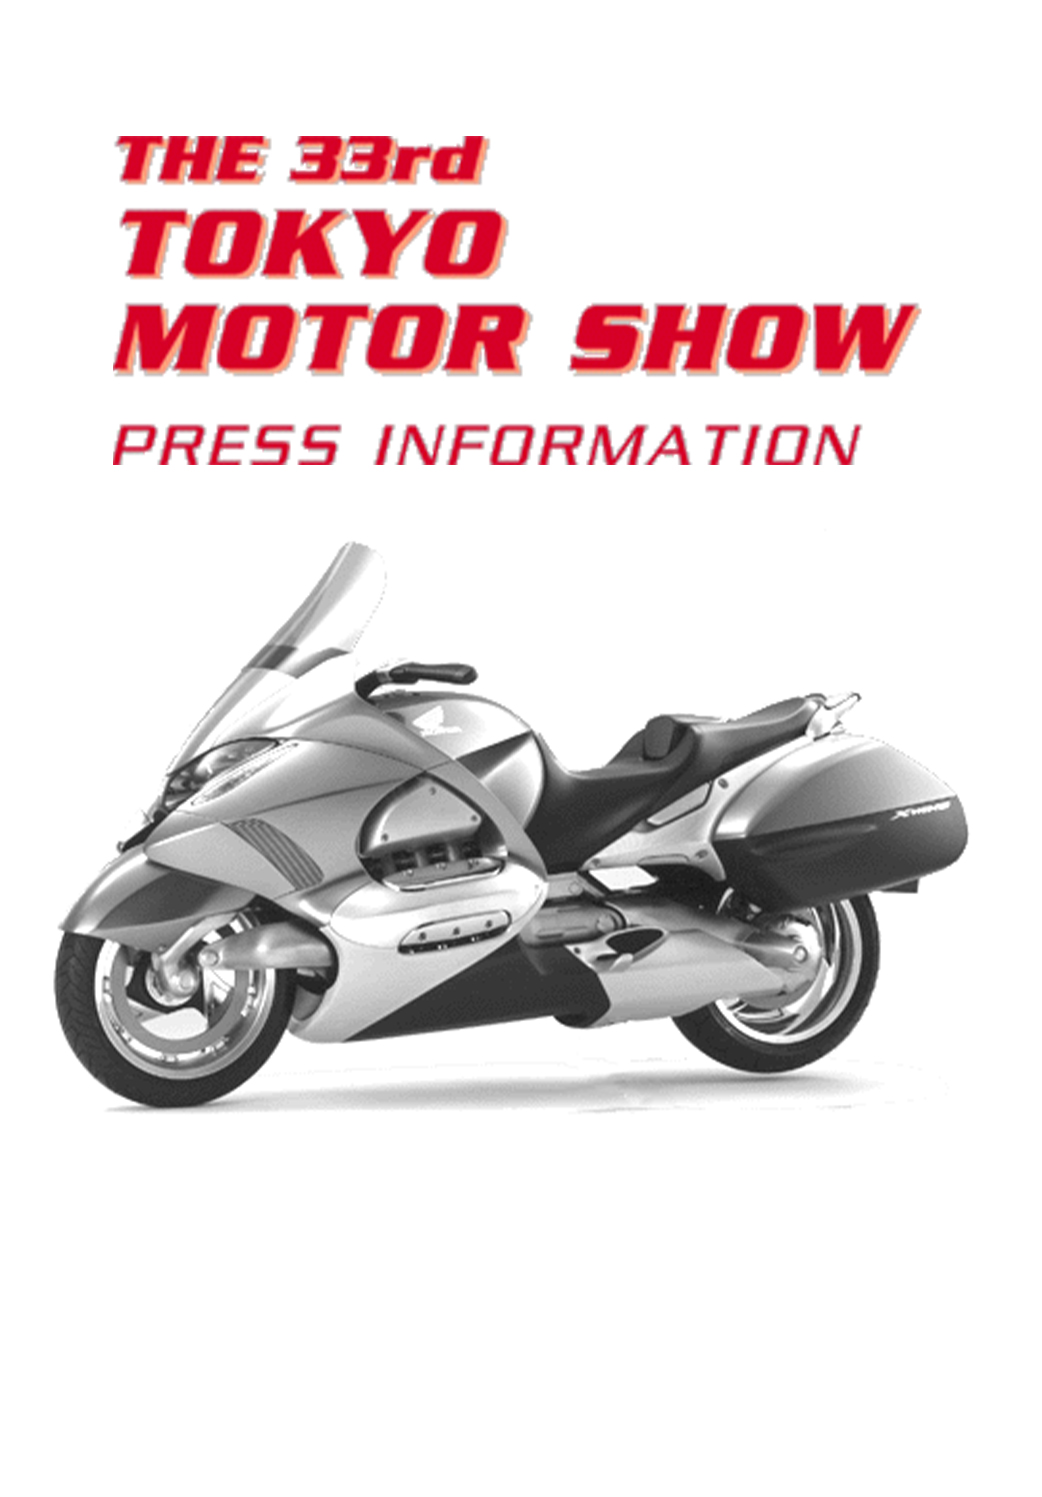 The 33rd TOKYO MOTOR SHOW